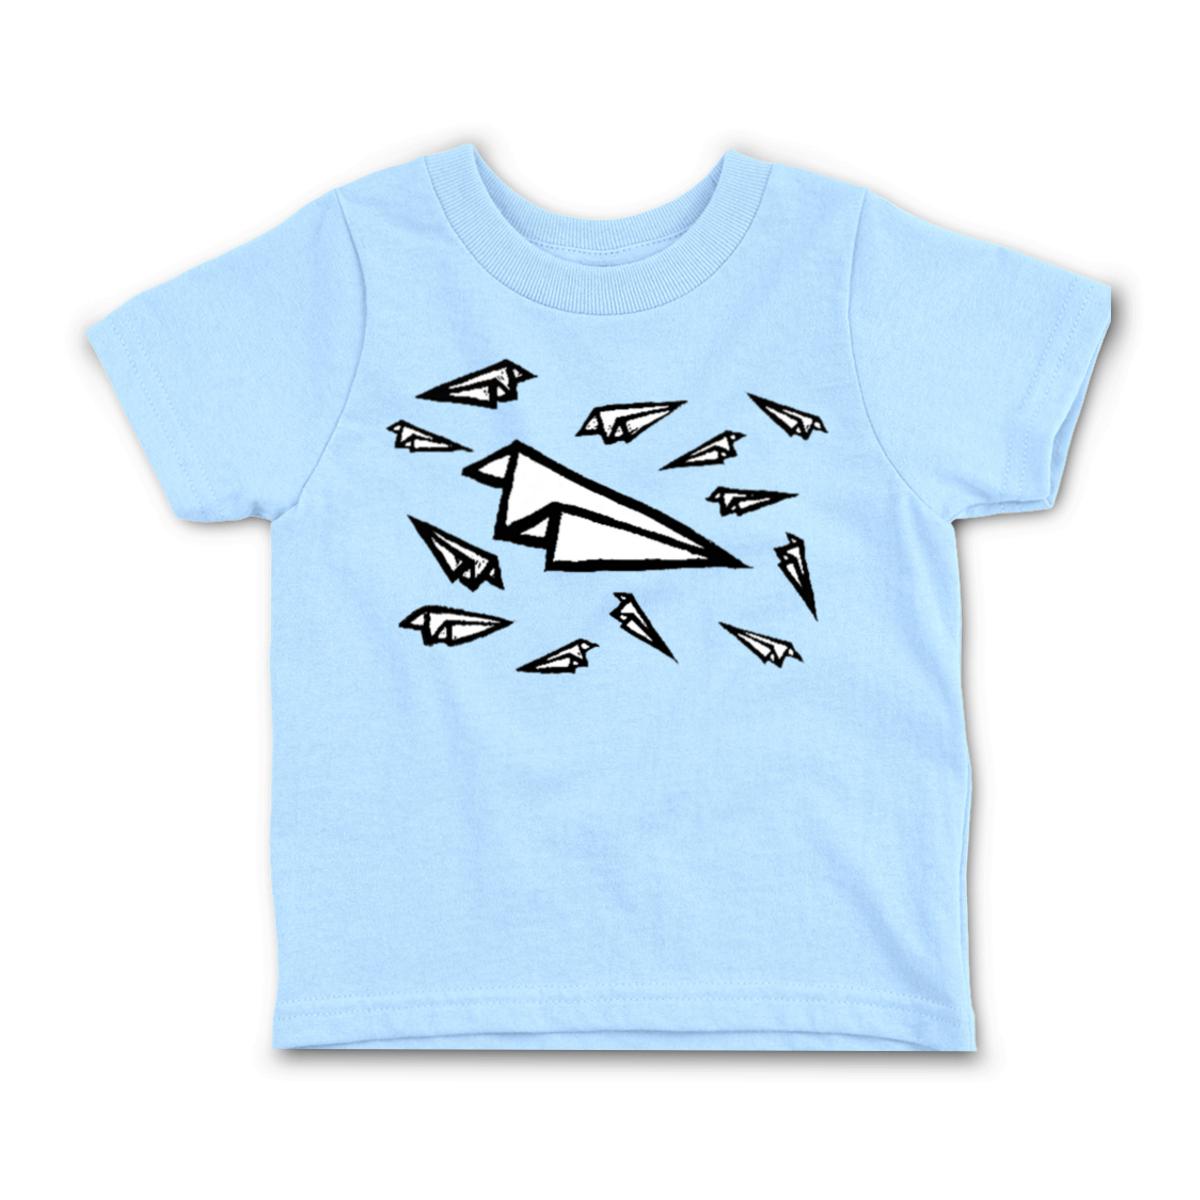 Airplane Frenzy Toddler Tee 4T light-blue